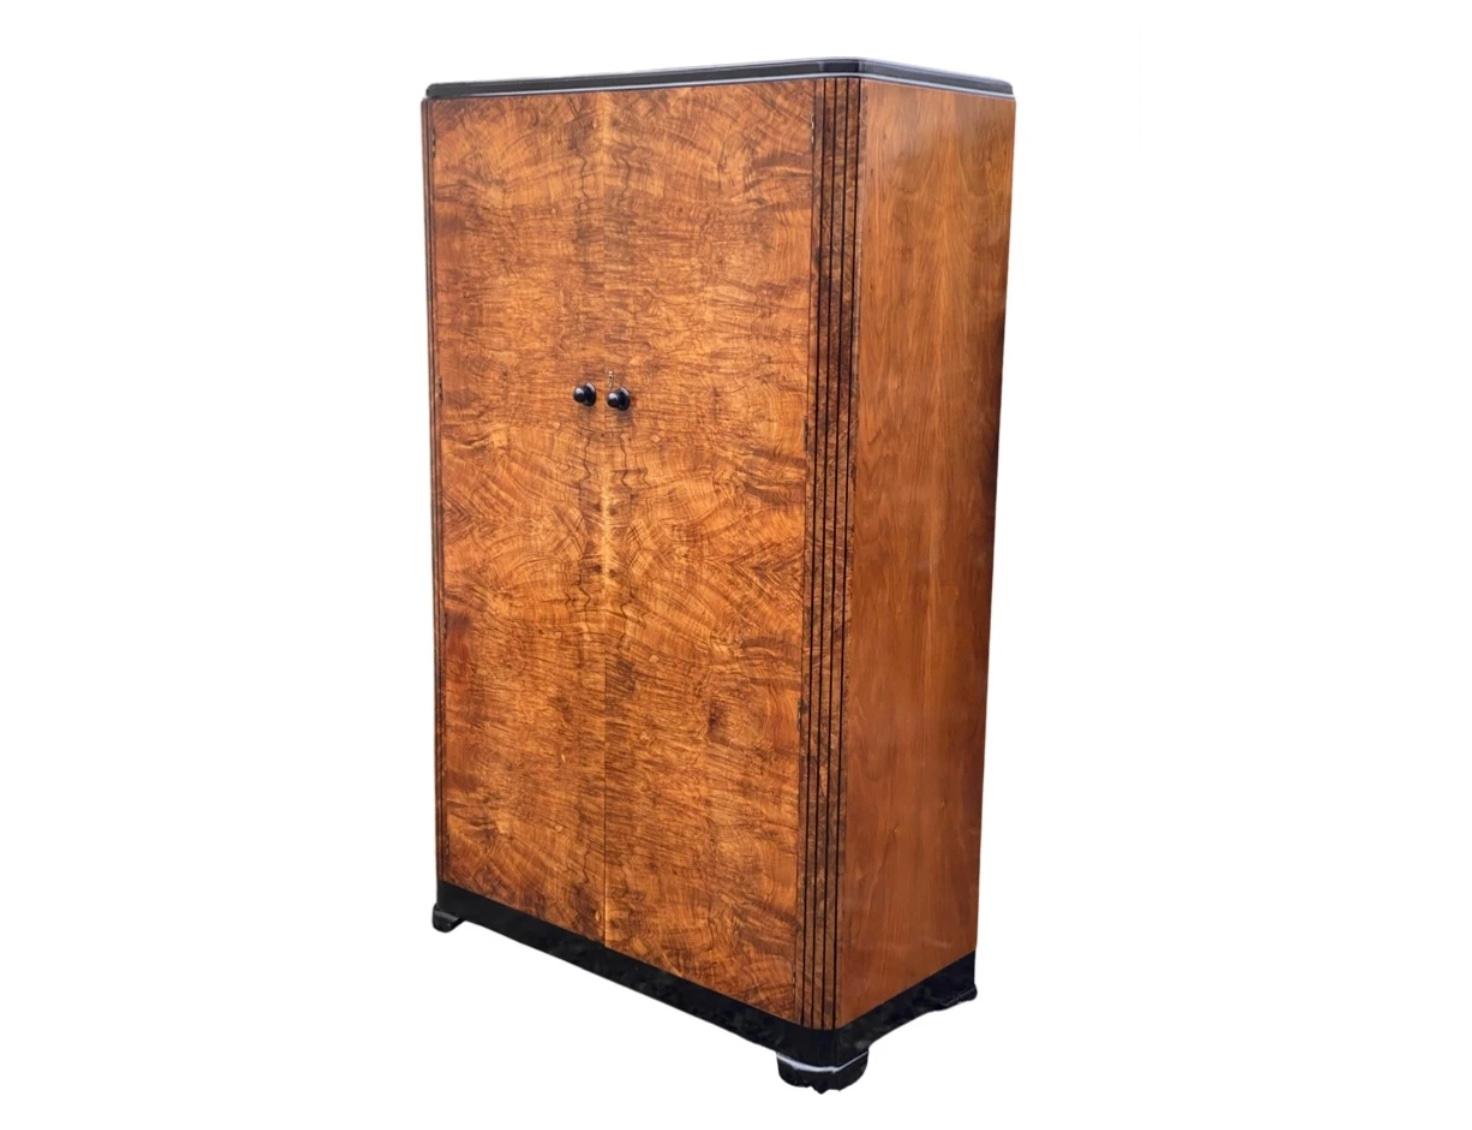 New in is this fabulous Art Deco 2 door wardrobe, veneered in the most amazing “oyster” veneers. Complementing the rich warm honey colours of the veneers to the sides and front are ebonised accents. These are the plinth, the cornice, the 2 original